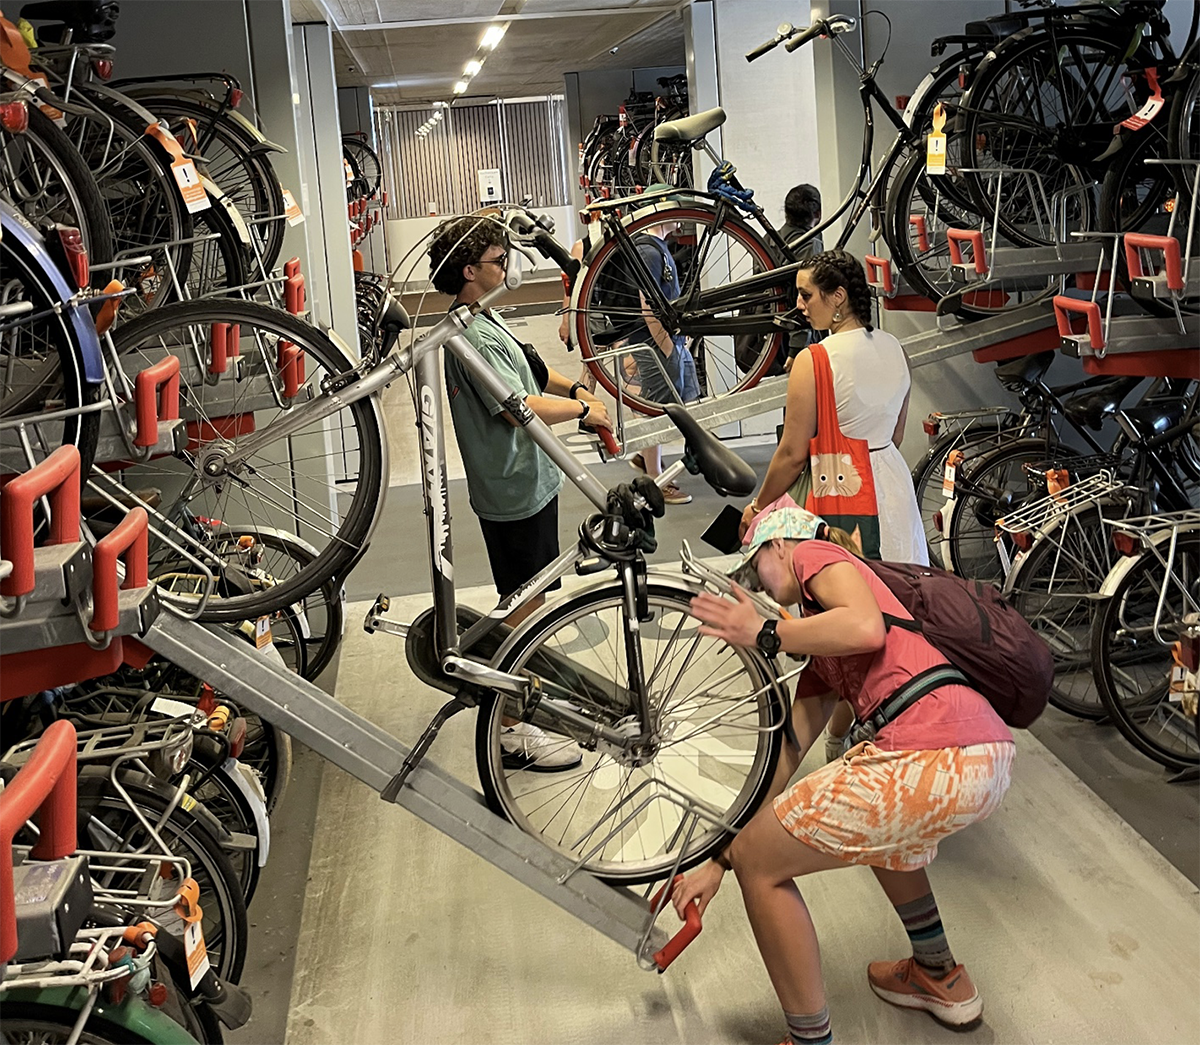 photo: Students checking out the largest bicycle parking garage in the world: 12,500 secure and free bike parking spaces underneath the Utrecht Central Train Station.